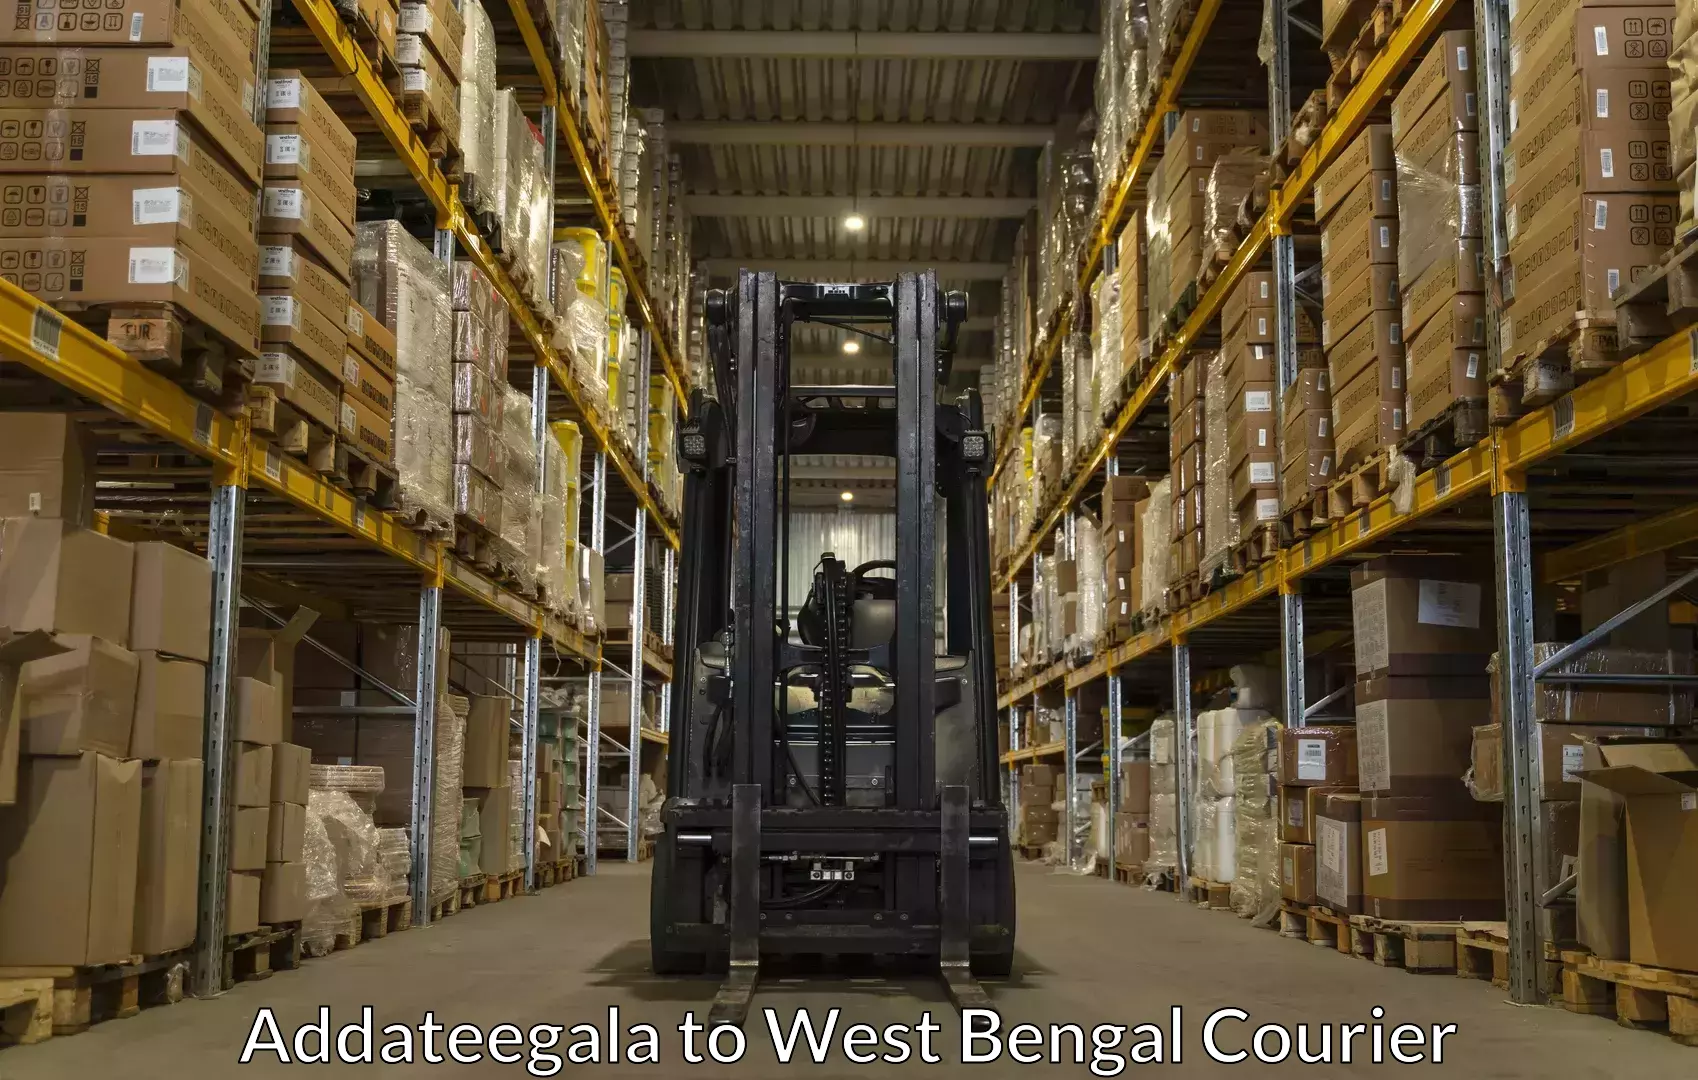 Furniture relocation experts Addateegala to West Bengal